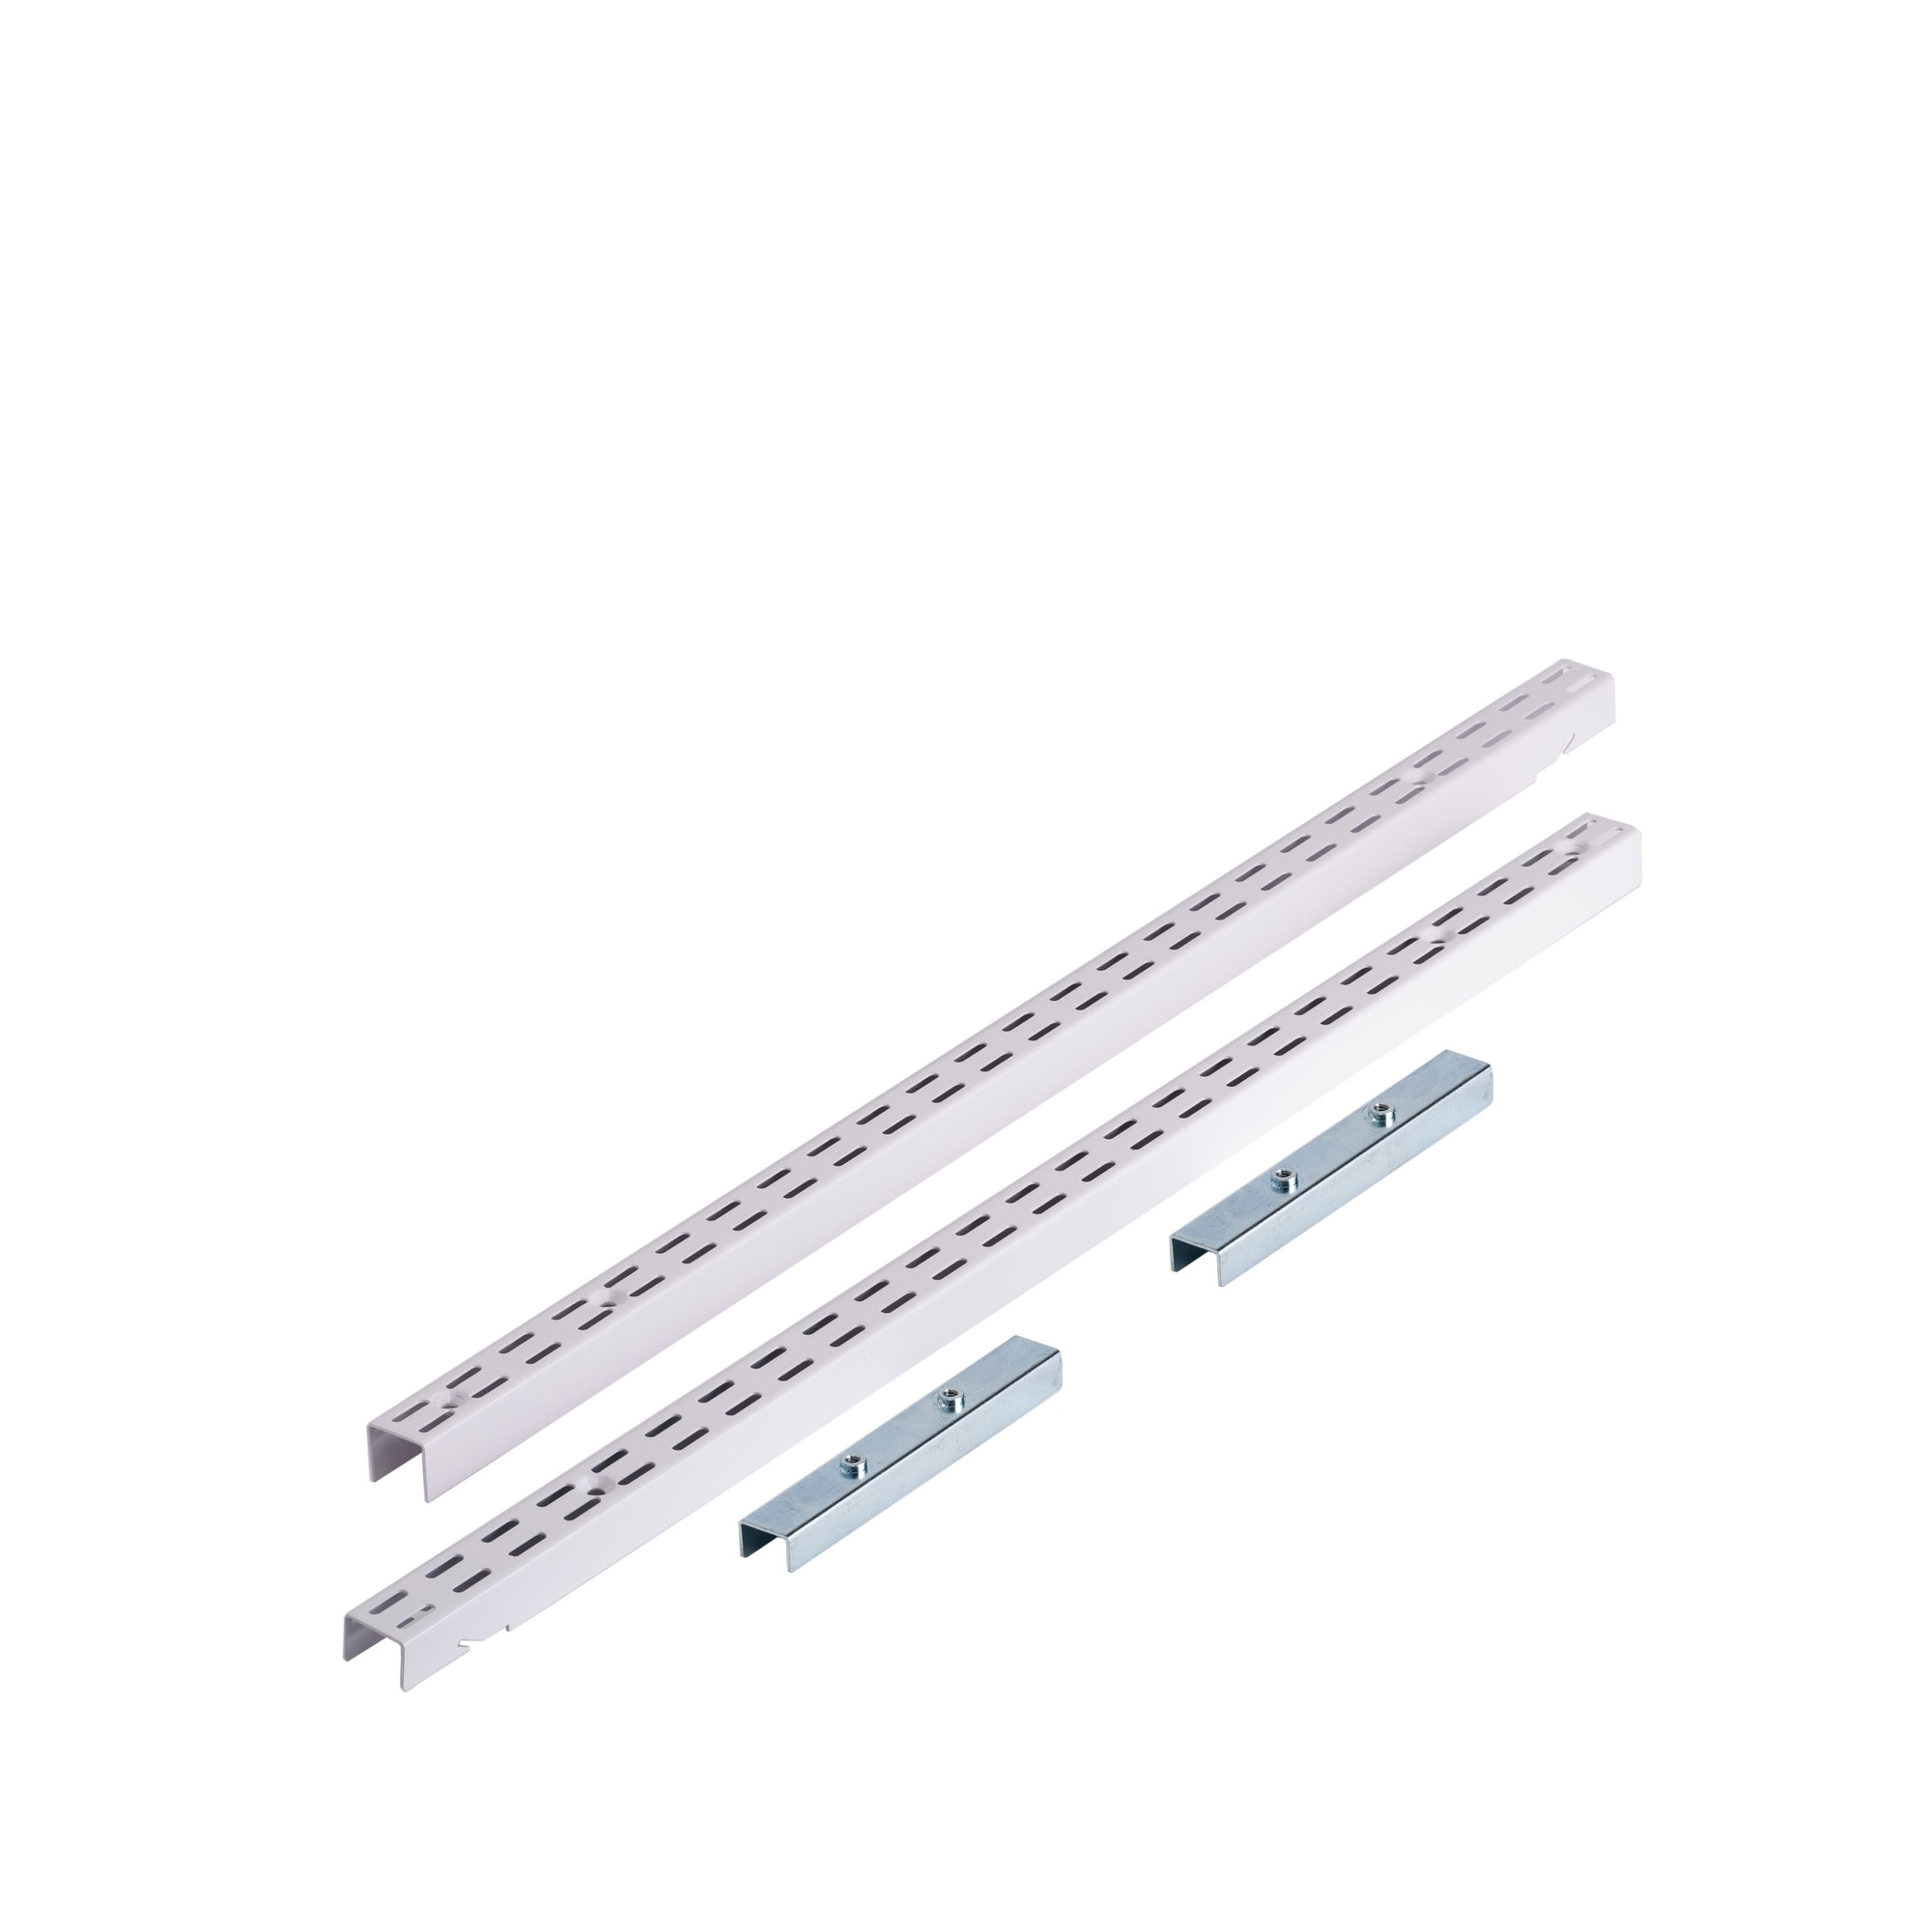 Triton Products, Vertical Hang Rail, Capacity 375 lb, Length 31.5 in, Width 1 in, Model 1701-WHT